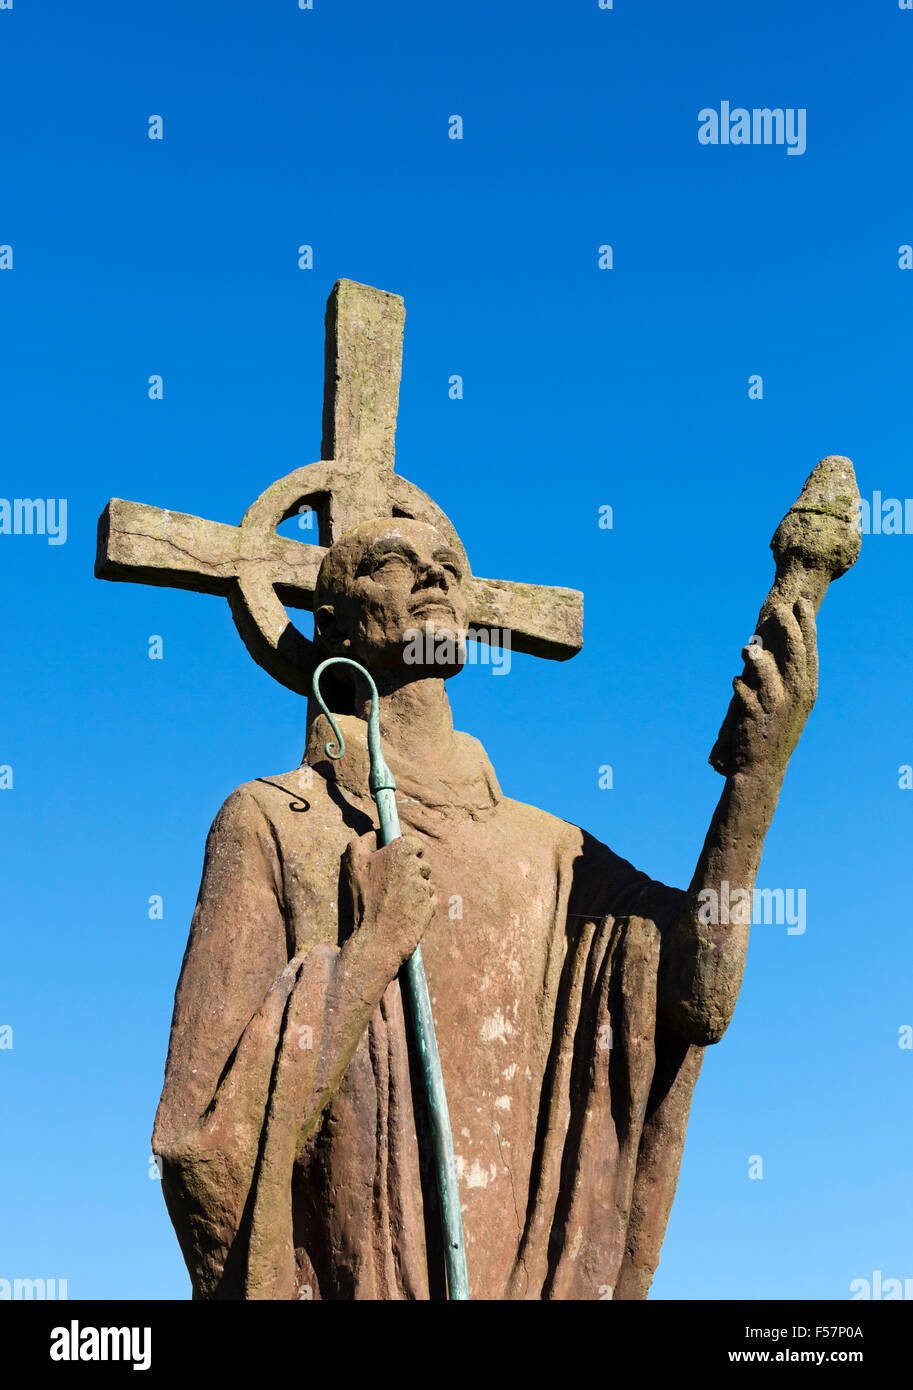 Statue of St Aidan (by sculptor Kathleen Parbury) in the grounds of Lindisfarne Priory, Holy Island, Northumberland, England, UK Stock Photo